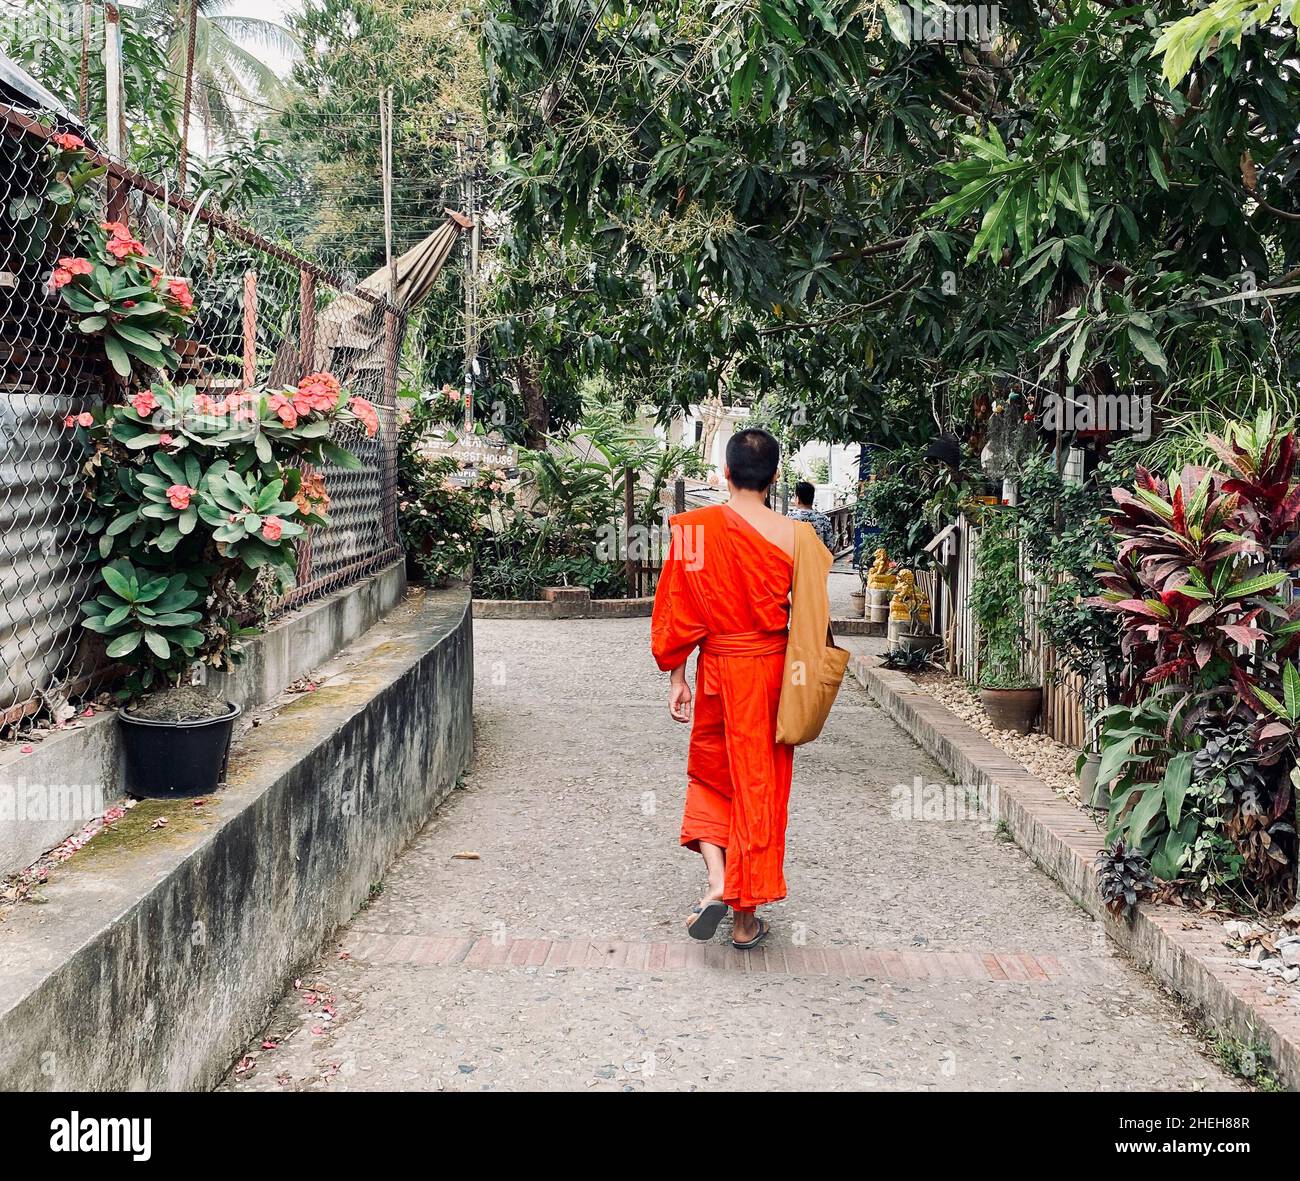 Luang Phrabang, Laos - Feb 5, 2020. Monks walking on street in Luang Phrabang, Laos. The city was the capital of the kingdom of Laos for thousands of Stock Photo